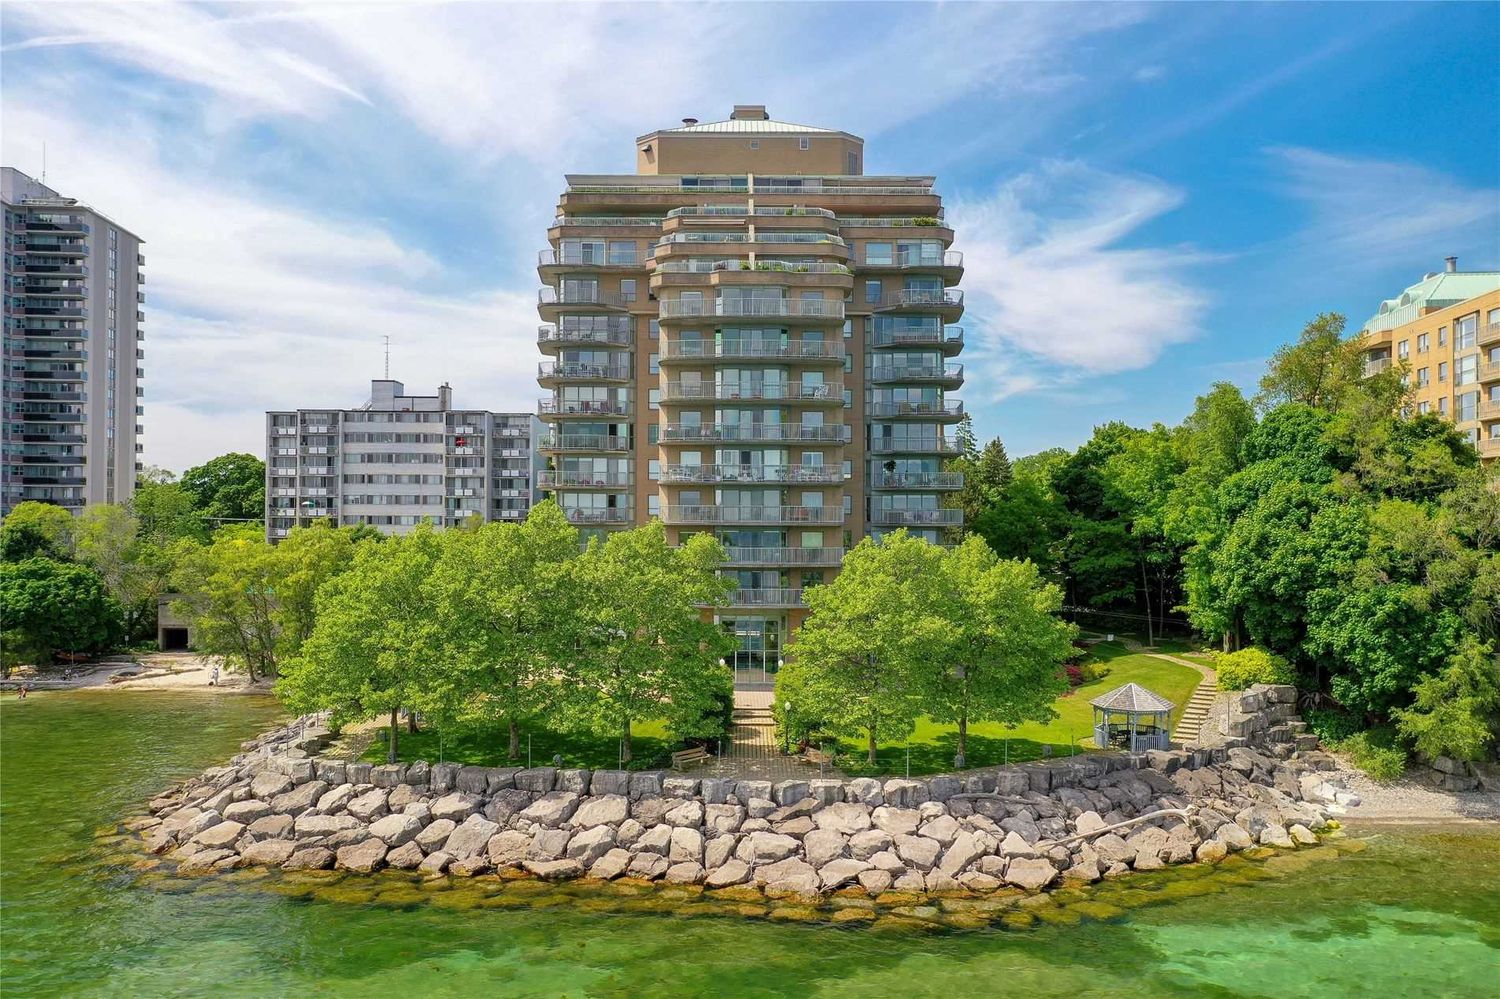 2190 Lakeshore Road. Lakepoint Condos is located in  Burlington, Toronto - image #2 of 2